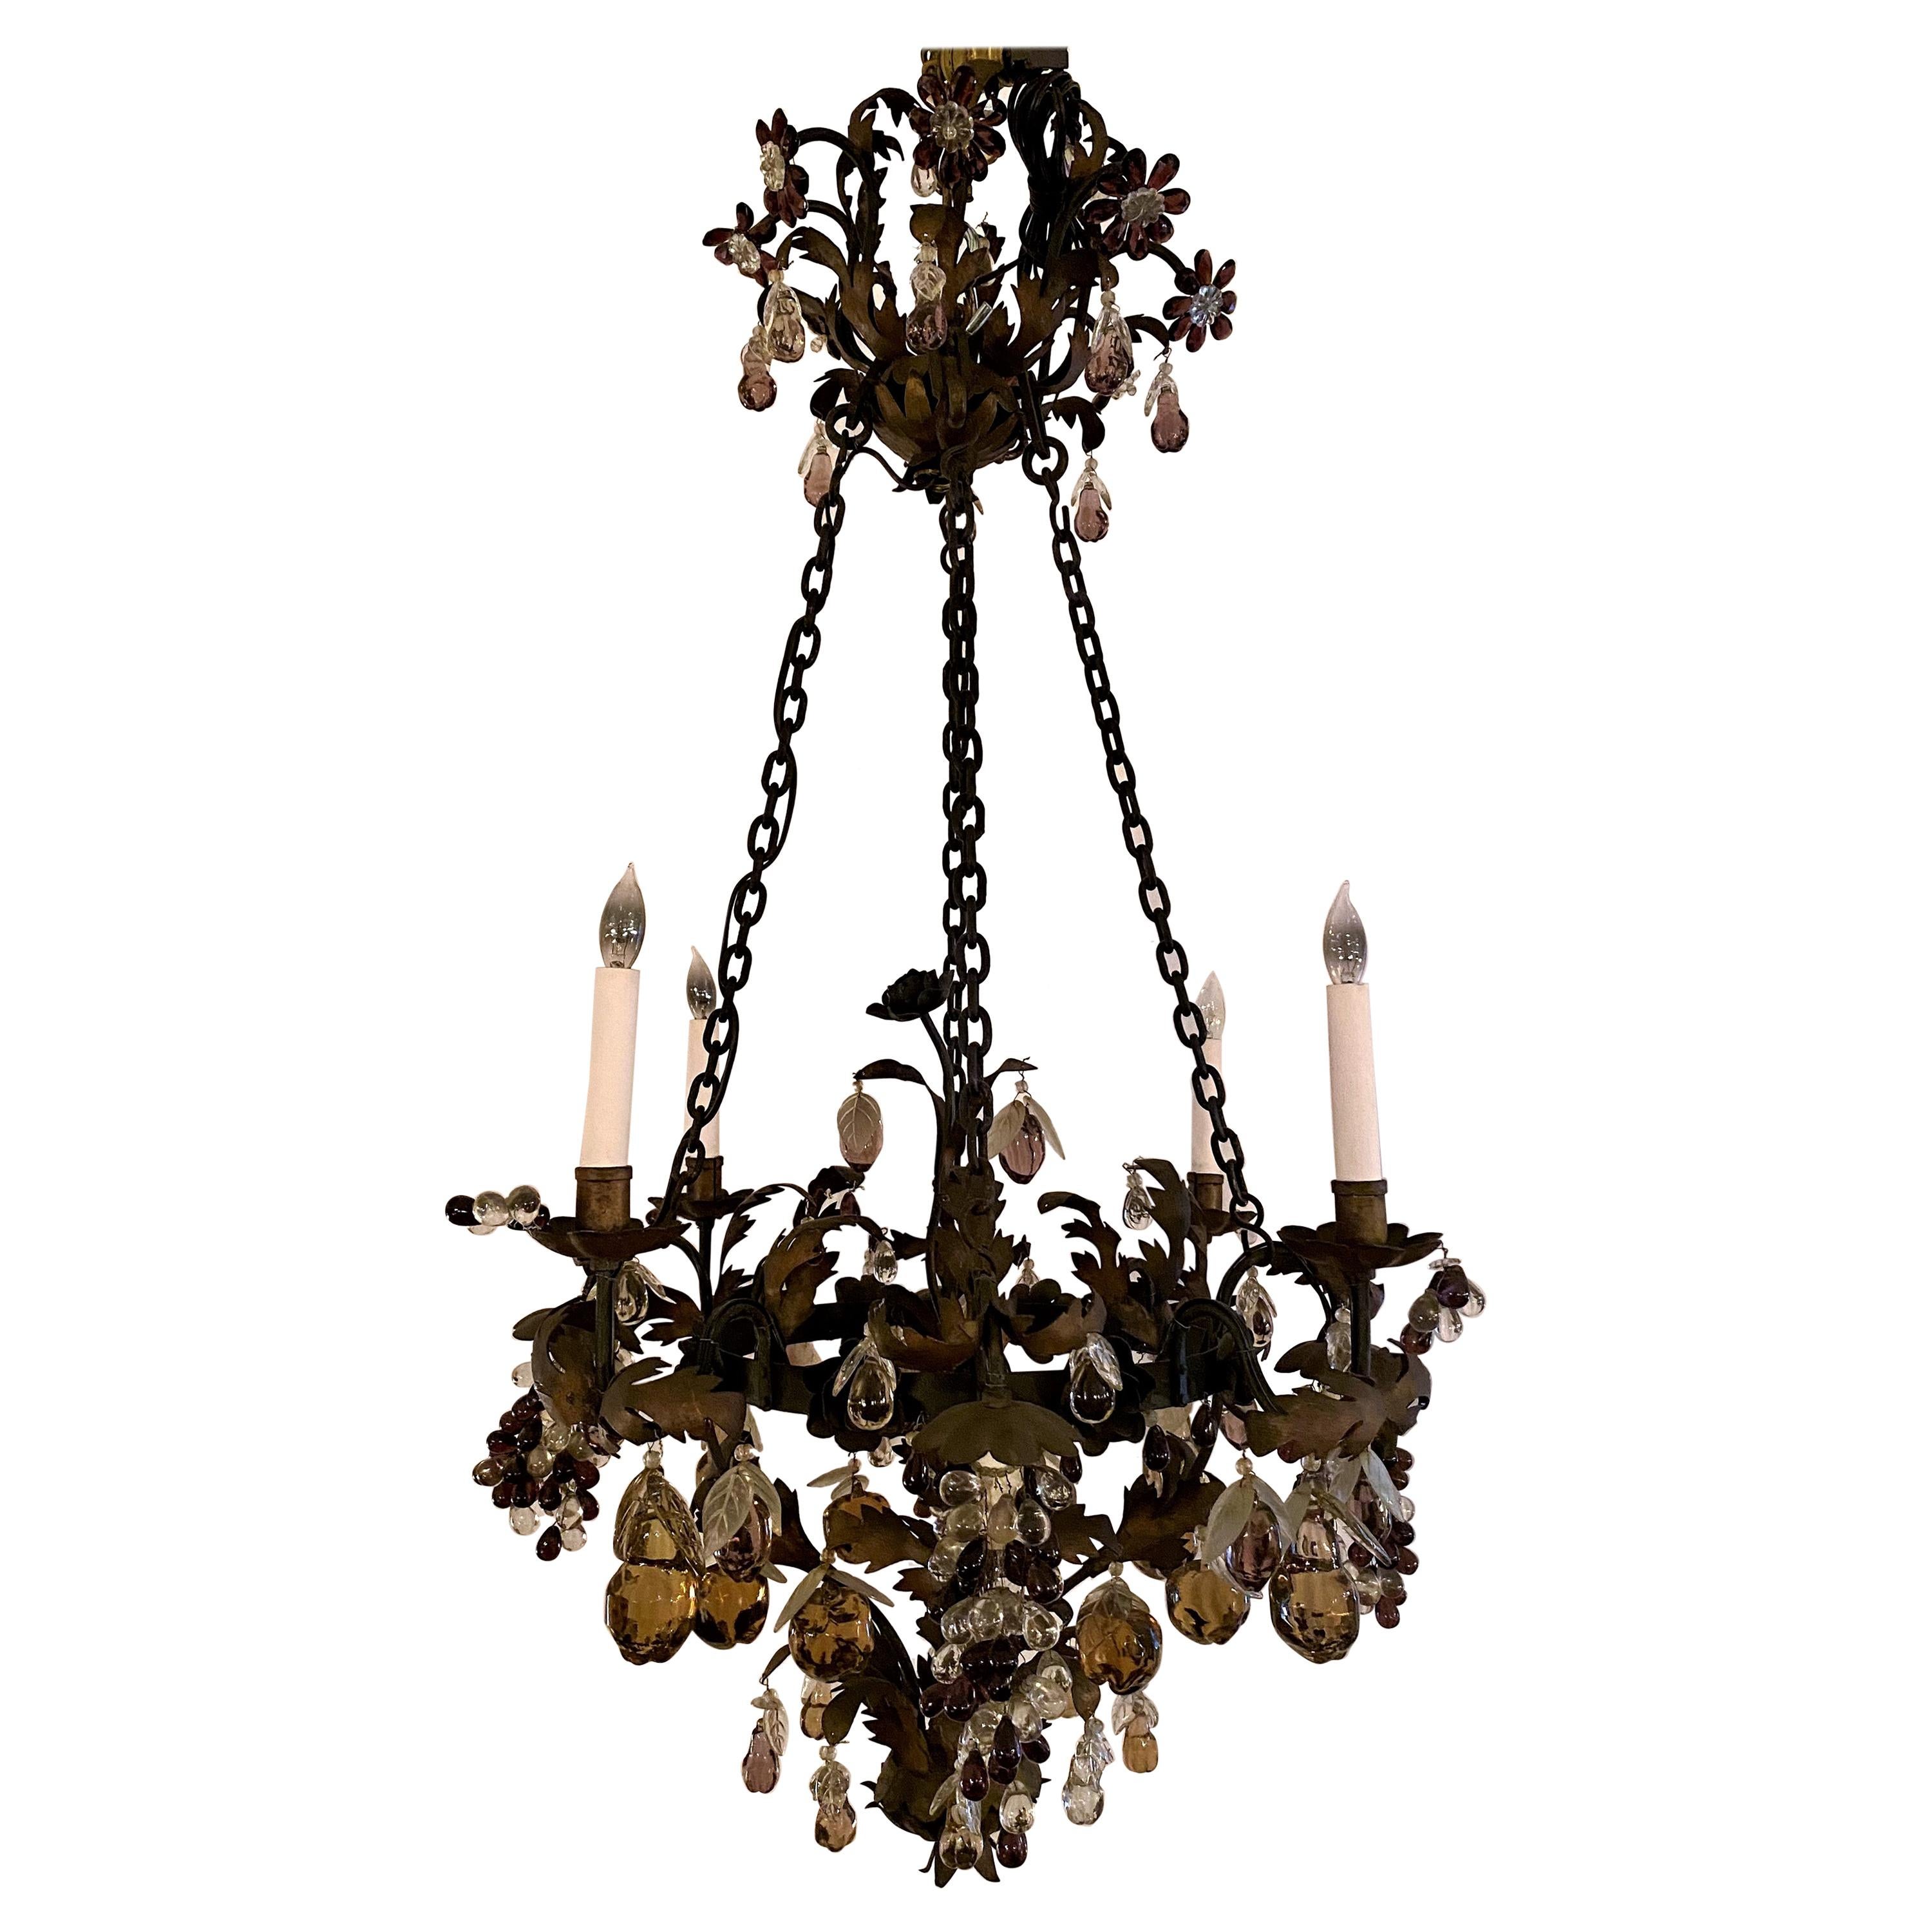 Antique French Baccarat Multicolored Crystal & Tole Chandelier, circa 1820-1840 For Sale